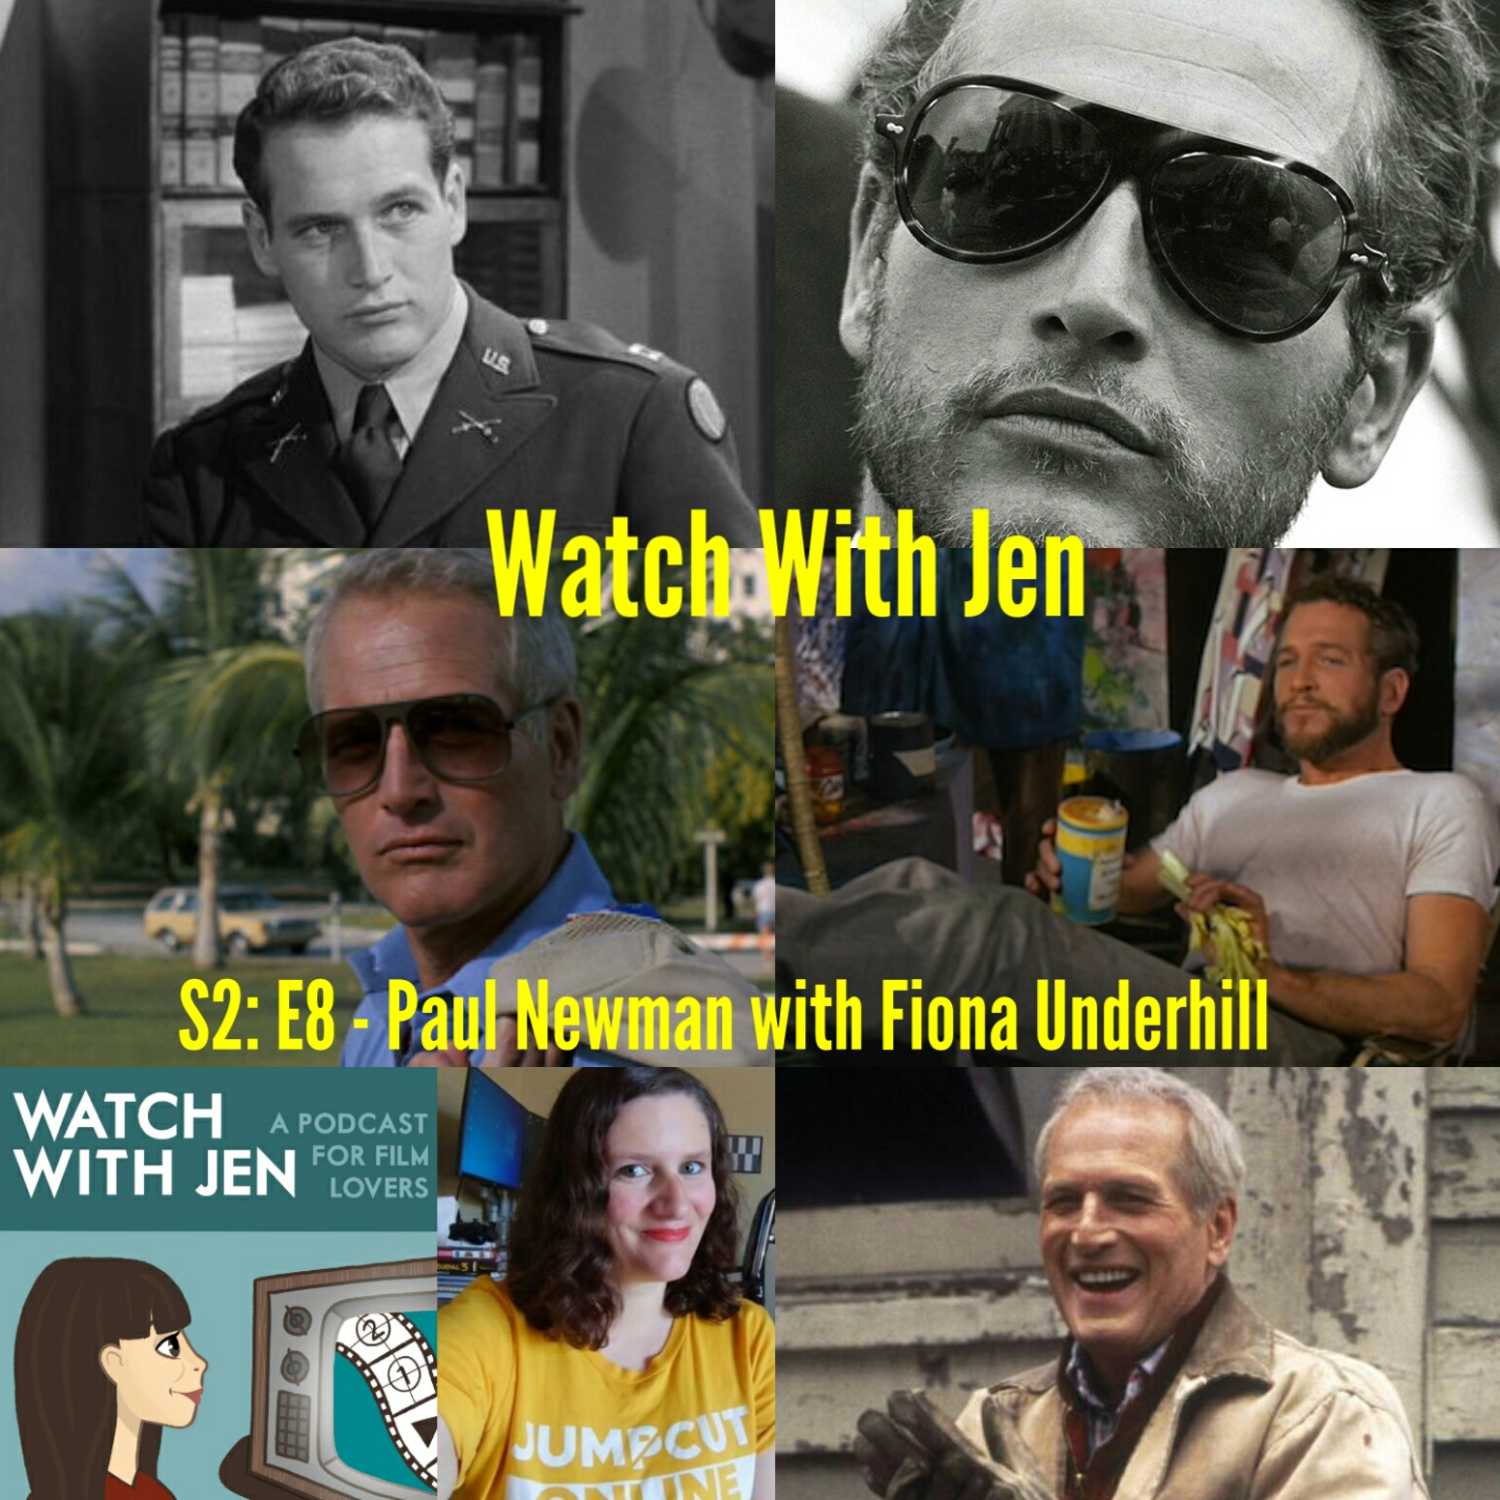 Watch With Jen - S2: E8 - Paul Newman with Fiona Underhill